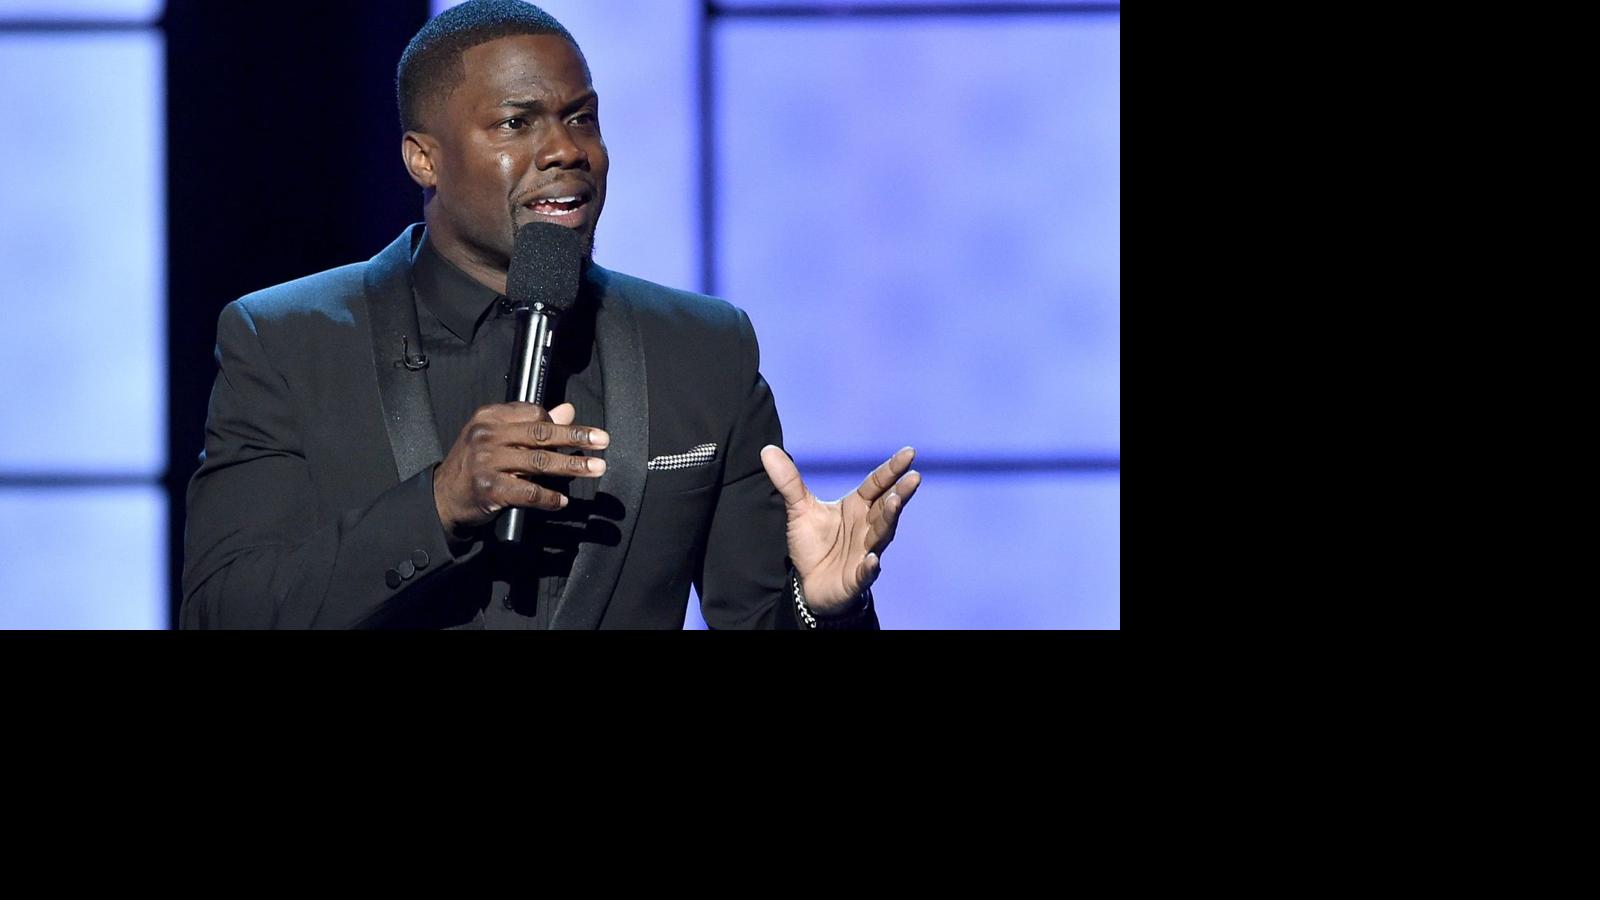 Though funny, comedy king Kevin Hart falls short in ...